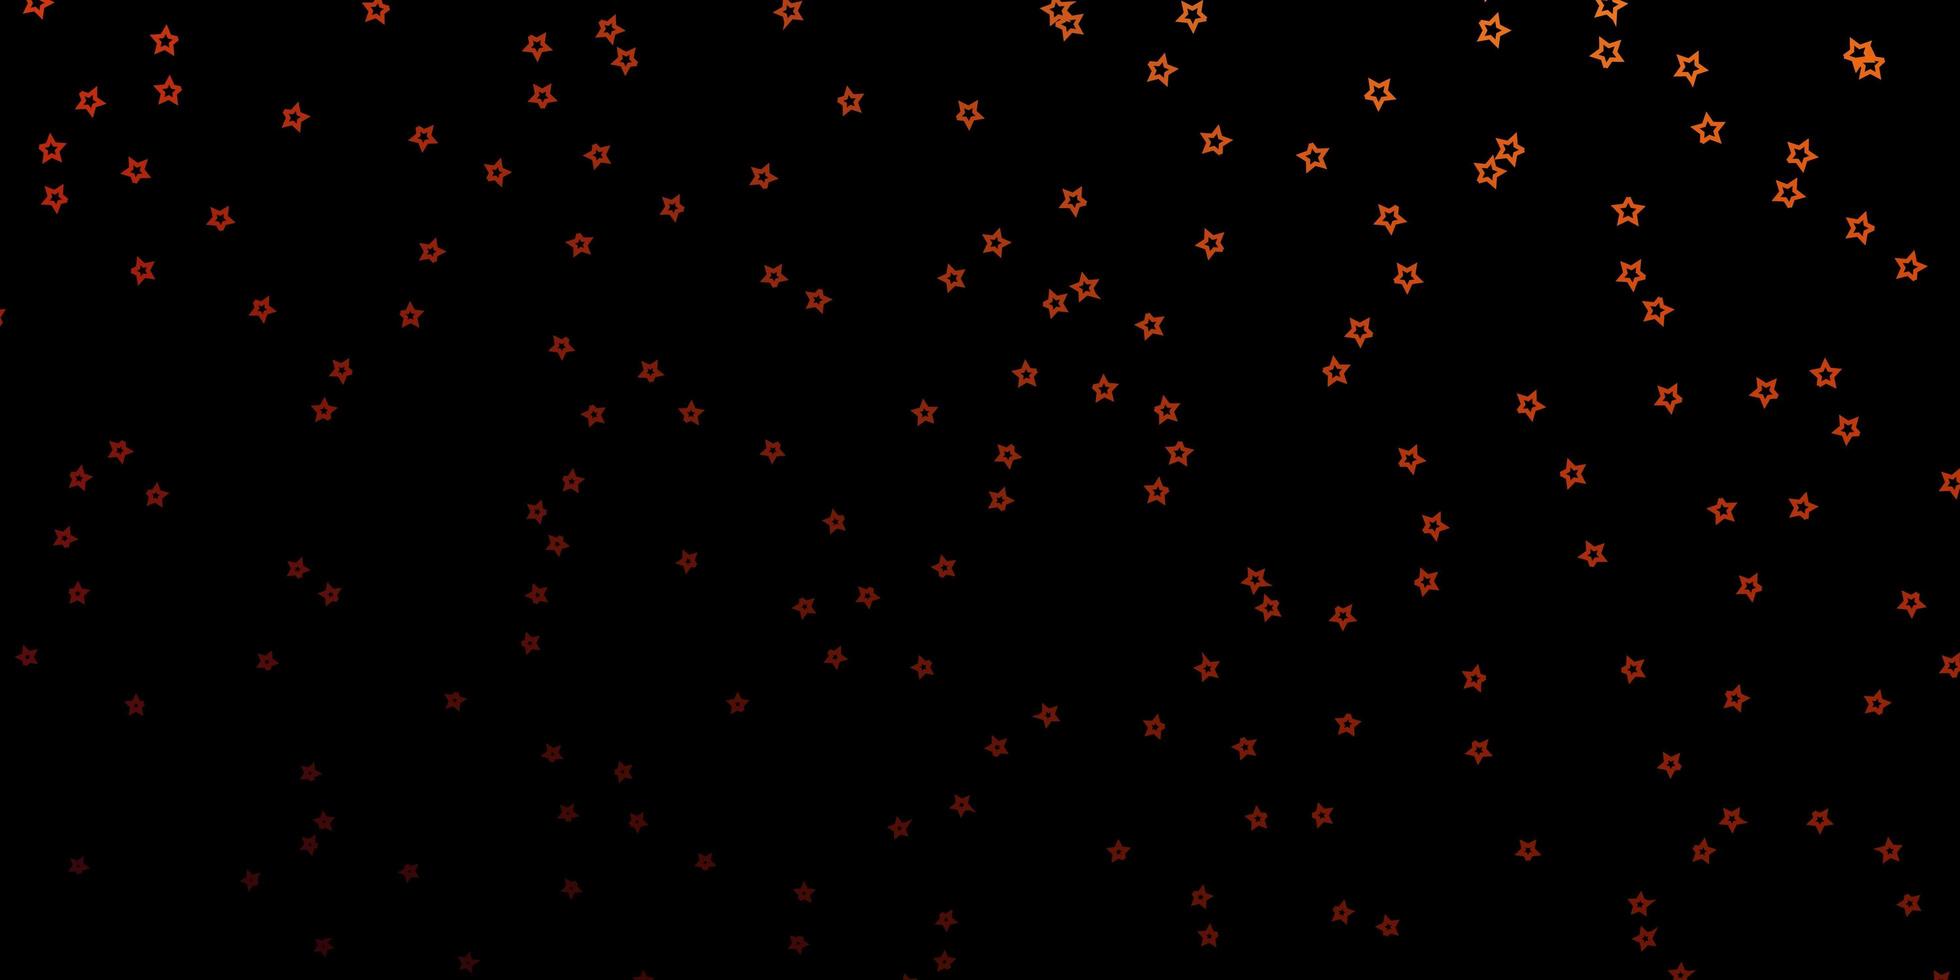 Dark Orange vector background with small and big stars. Shining colorful illustration with small and big stars. Best design for your ad, poster, banner.